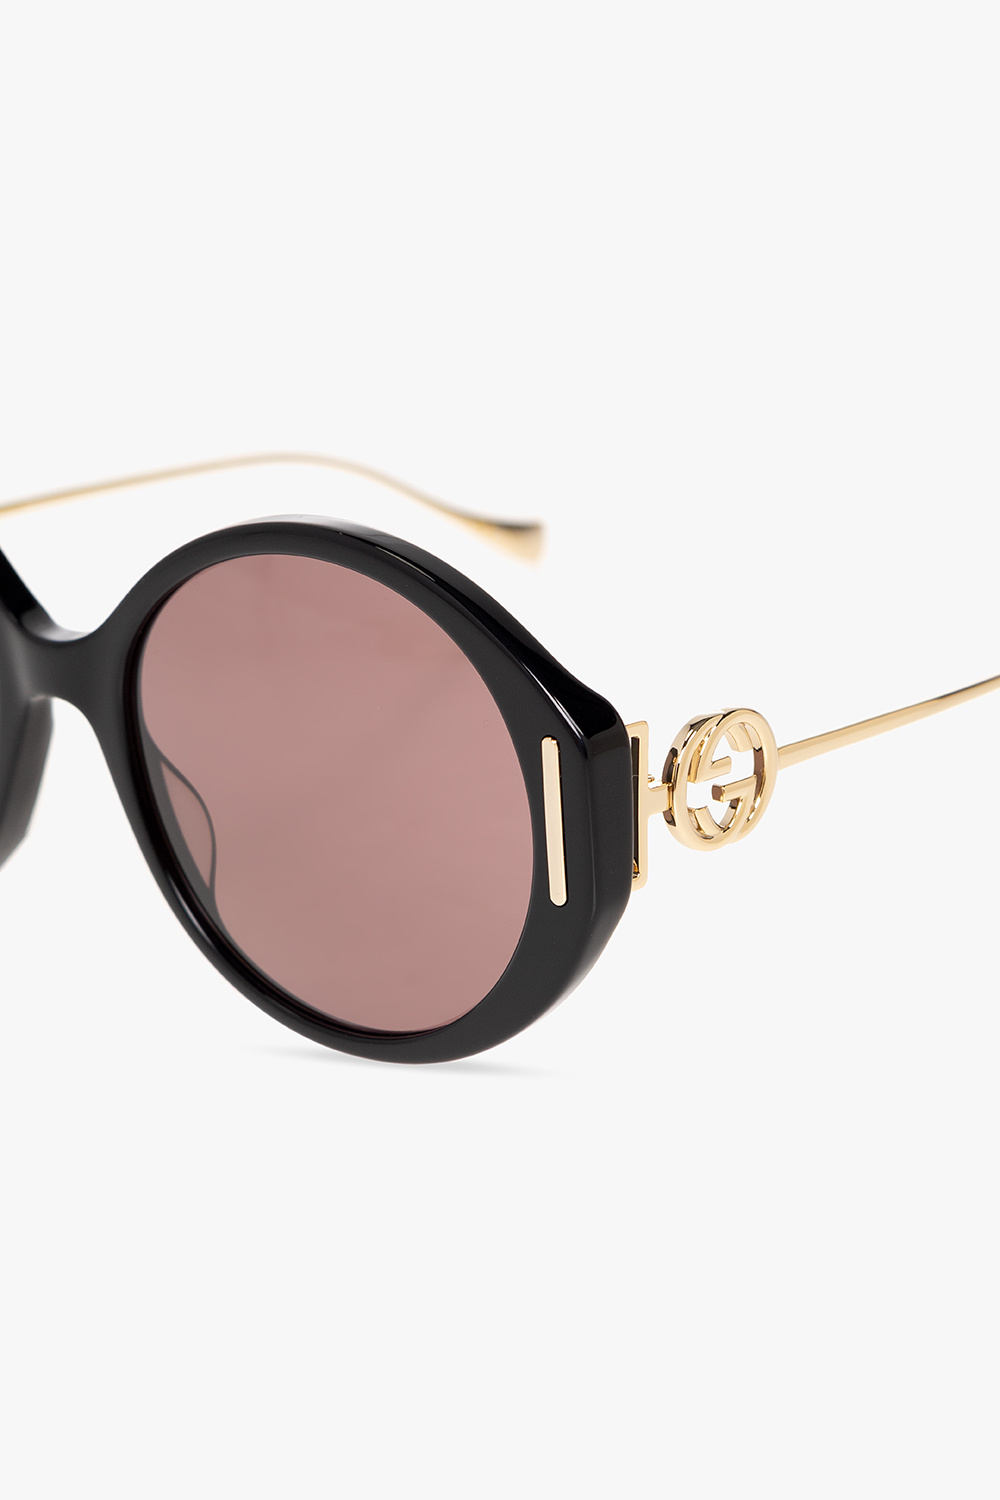 Gucci Burberry Eyewear tinted square-frame sunglasses